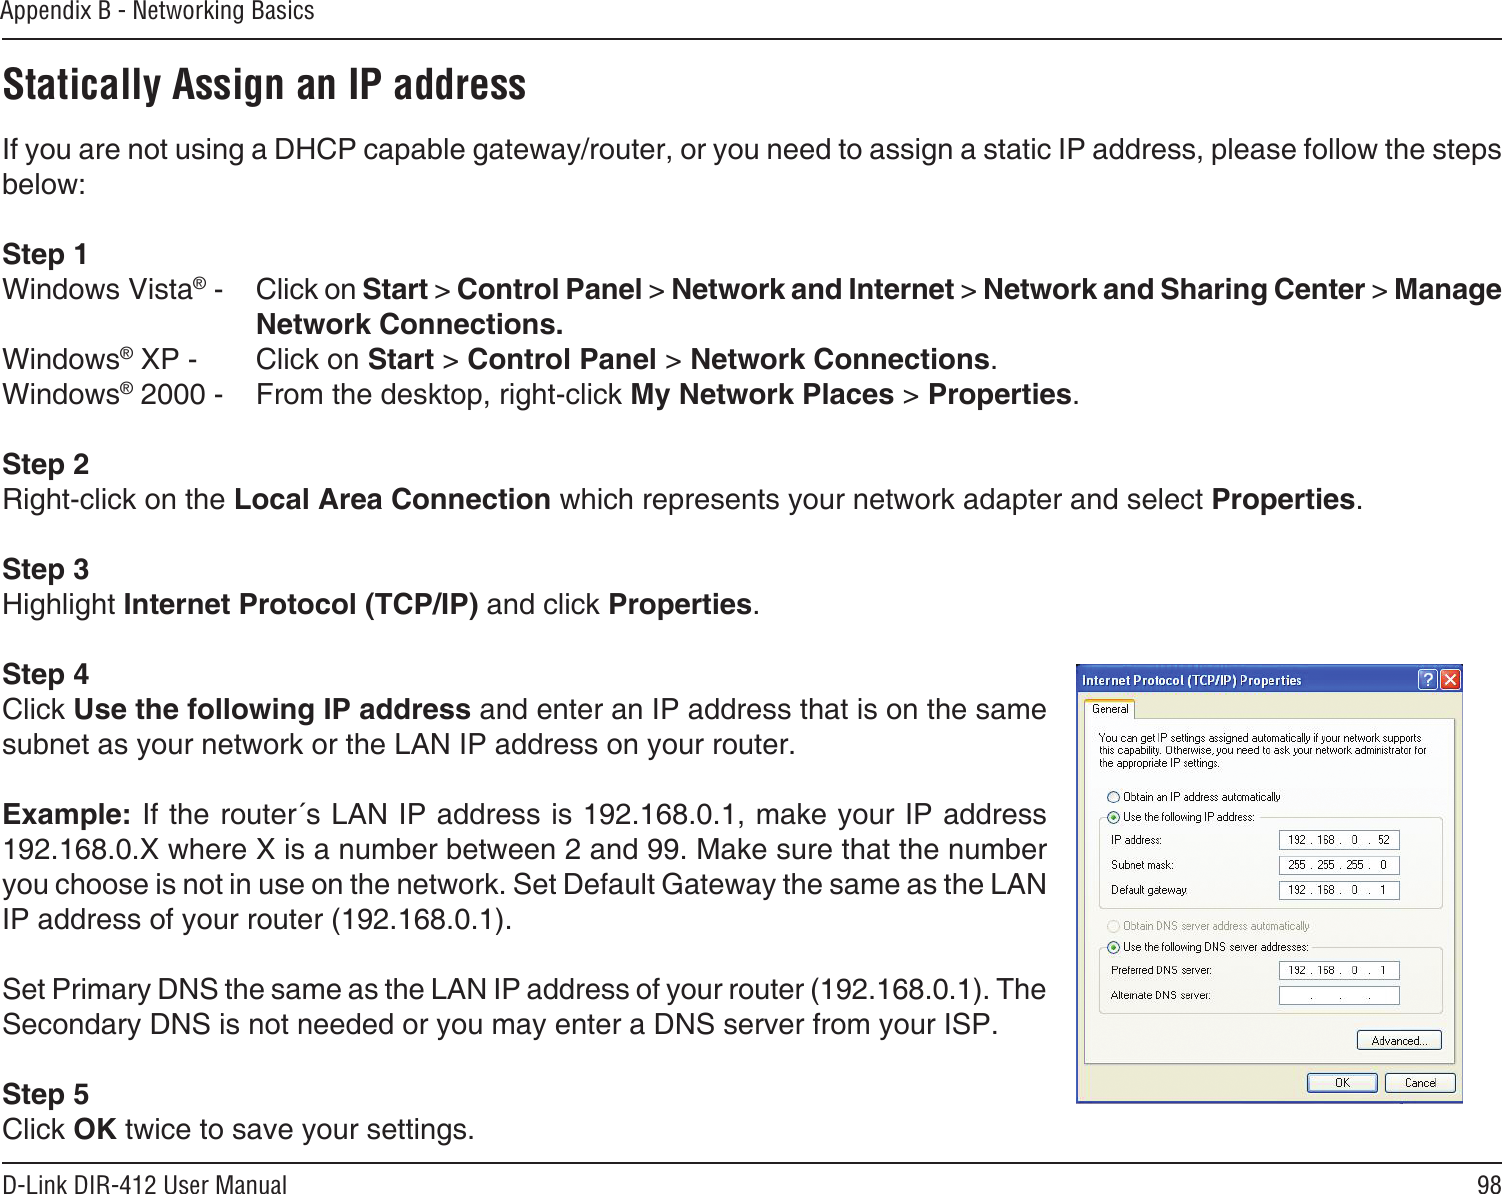 98D-Link DIR-412 User ManualAppendix B - Networking BasicsStatically Assign an IP addressIf you are not using a DHCP capable gateway/router, or you need to assign a static IP address, please follow the steps below:Step 1Windows Vista® -  Click on Start &gt; Control Panel &gt; Network and Internet &gt; Network and Sharing Center &gt; Manage Network Connections.Windows® XP -  Click on Start &gt; Control Panel &gt; Network Connections.Windows® 2000 -  From the desktop, right-click My Network Places &gt; Properties.Step 2Right-click on the Local Area Connection which represents your network adapter and select Properties.Step 3Highlight Internet Protocol (TCP/IP) and click Properties.Step 4Click Use the following IP address and enter an IP address that is on the same subnet as your network or the LAN IP address on your router. Example: If the router´s LAN IP address is 192.168.0.1, make your IP address 192.168.0.X where X is a number between 2 and 99. Make sure that the number you choose is not in use on the network. Set Default Gateway the same as the LAN IP address of your router (192.168.0.1). Set Primary DNS the same as the LAN IP address of your router (192.168.0.1). The Secondary DNS is not needed or you may enter a DNS server from your ISP.Step 5Click OK twice to save your settings.